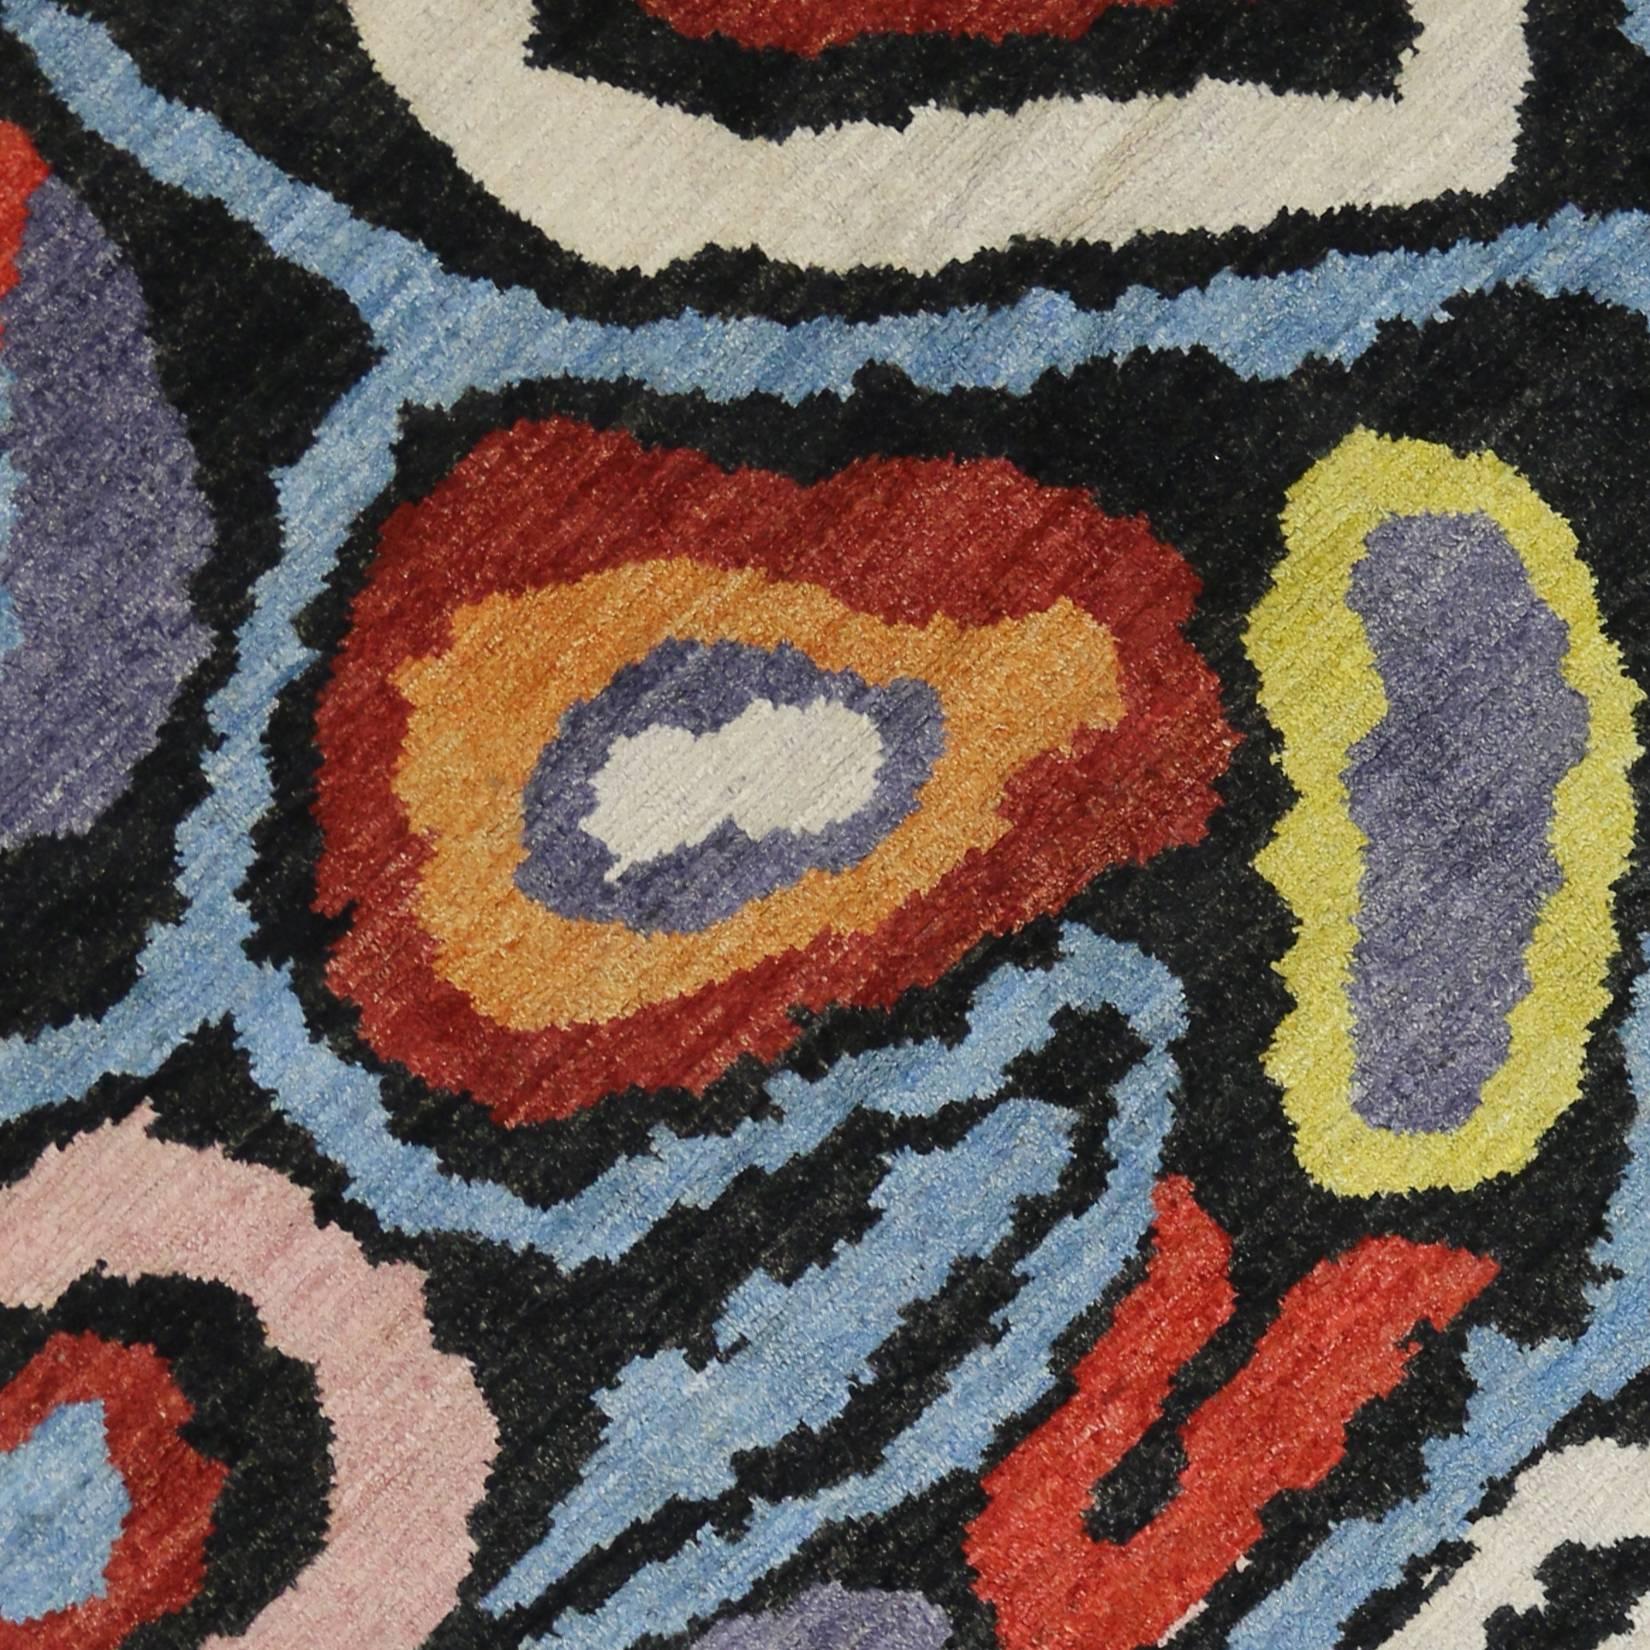 Space Age New Colorful Contemporary Moroccan Orphism Rug Inspired by Robert Delaunay